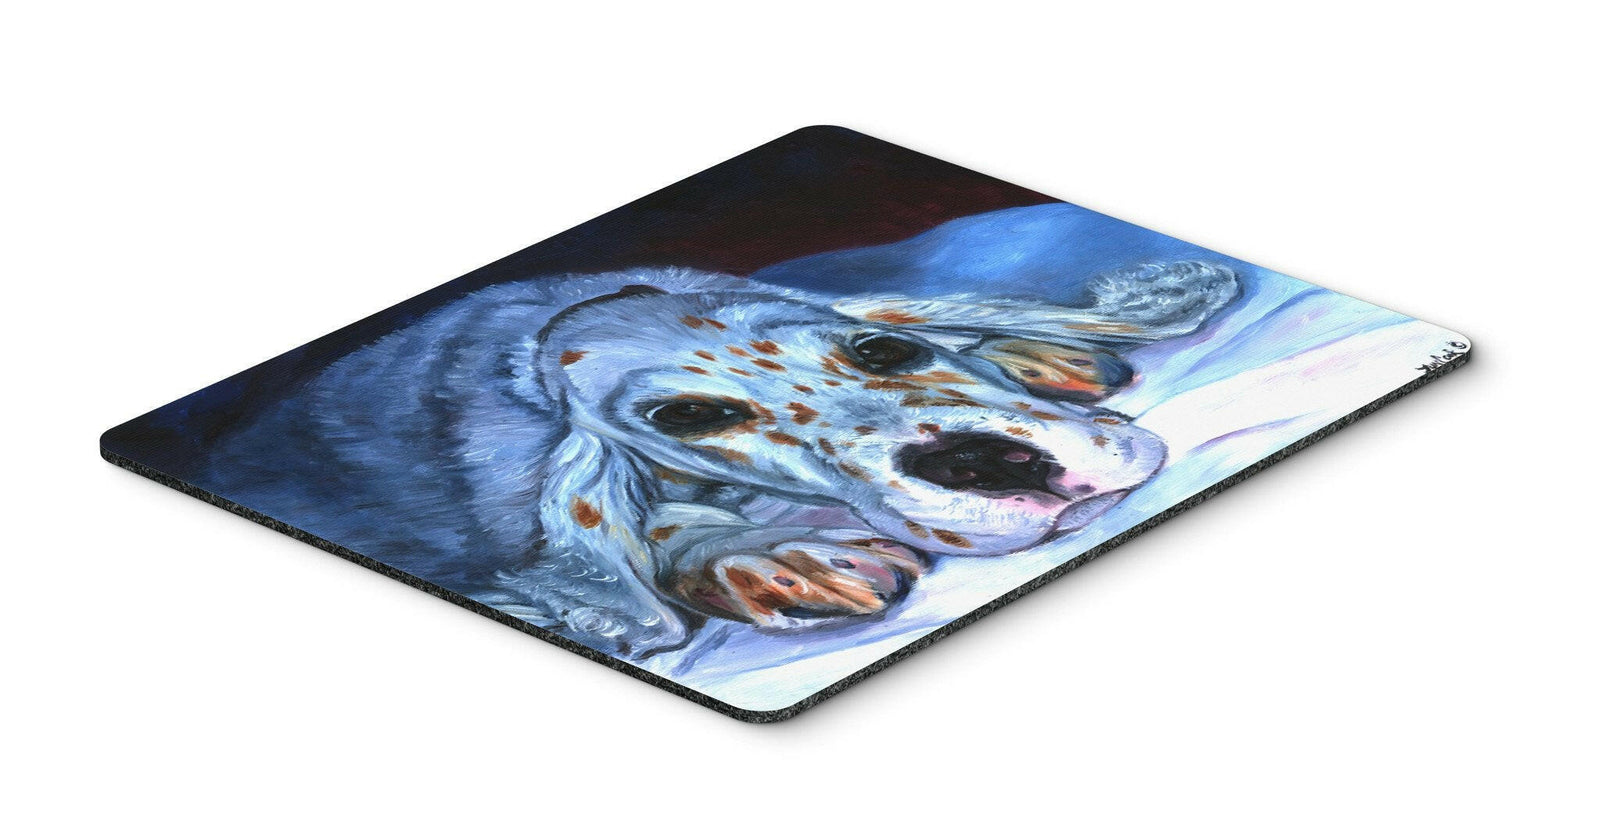 English Setter Pup Mouse Pad, Hot Pad or Trivet 7330MP by Caroline's Treasures